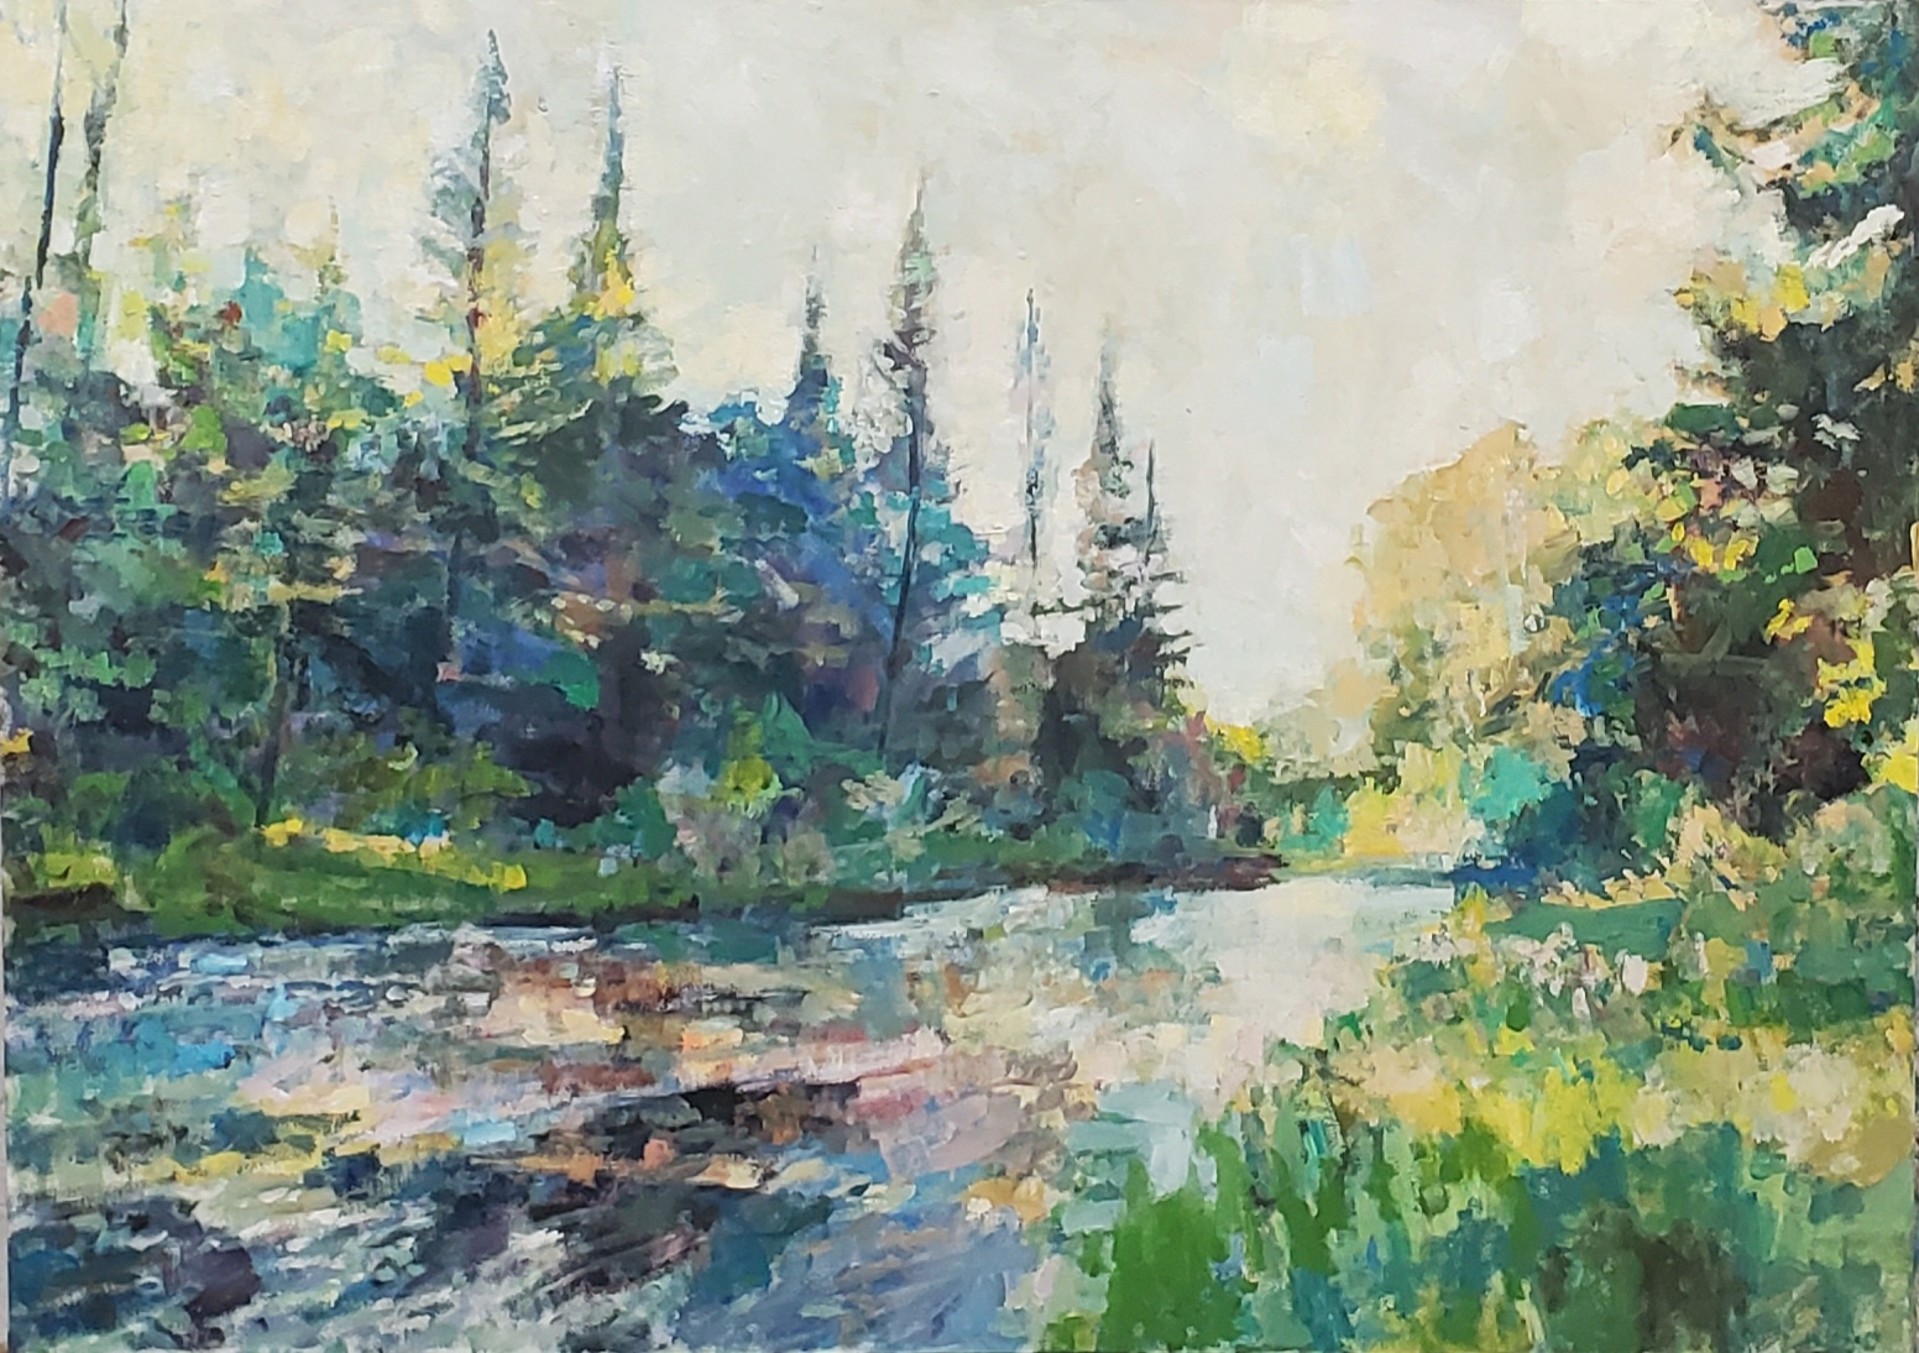 Pigeon River by Christopher Strunk